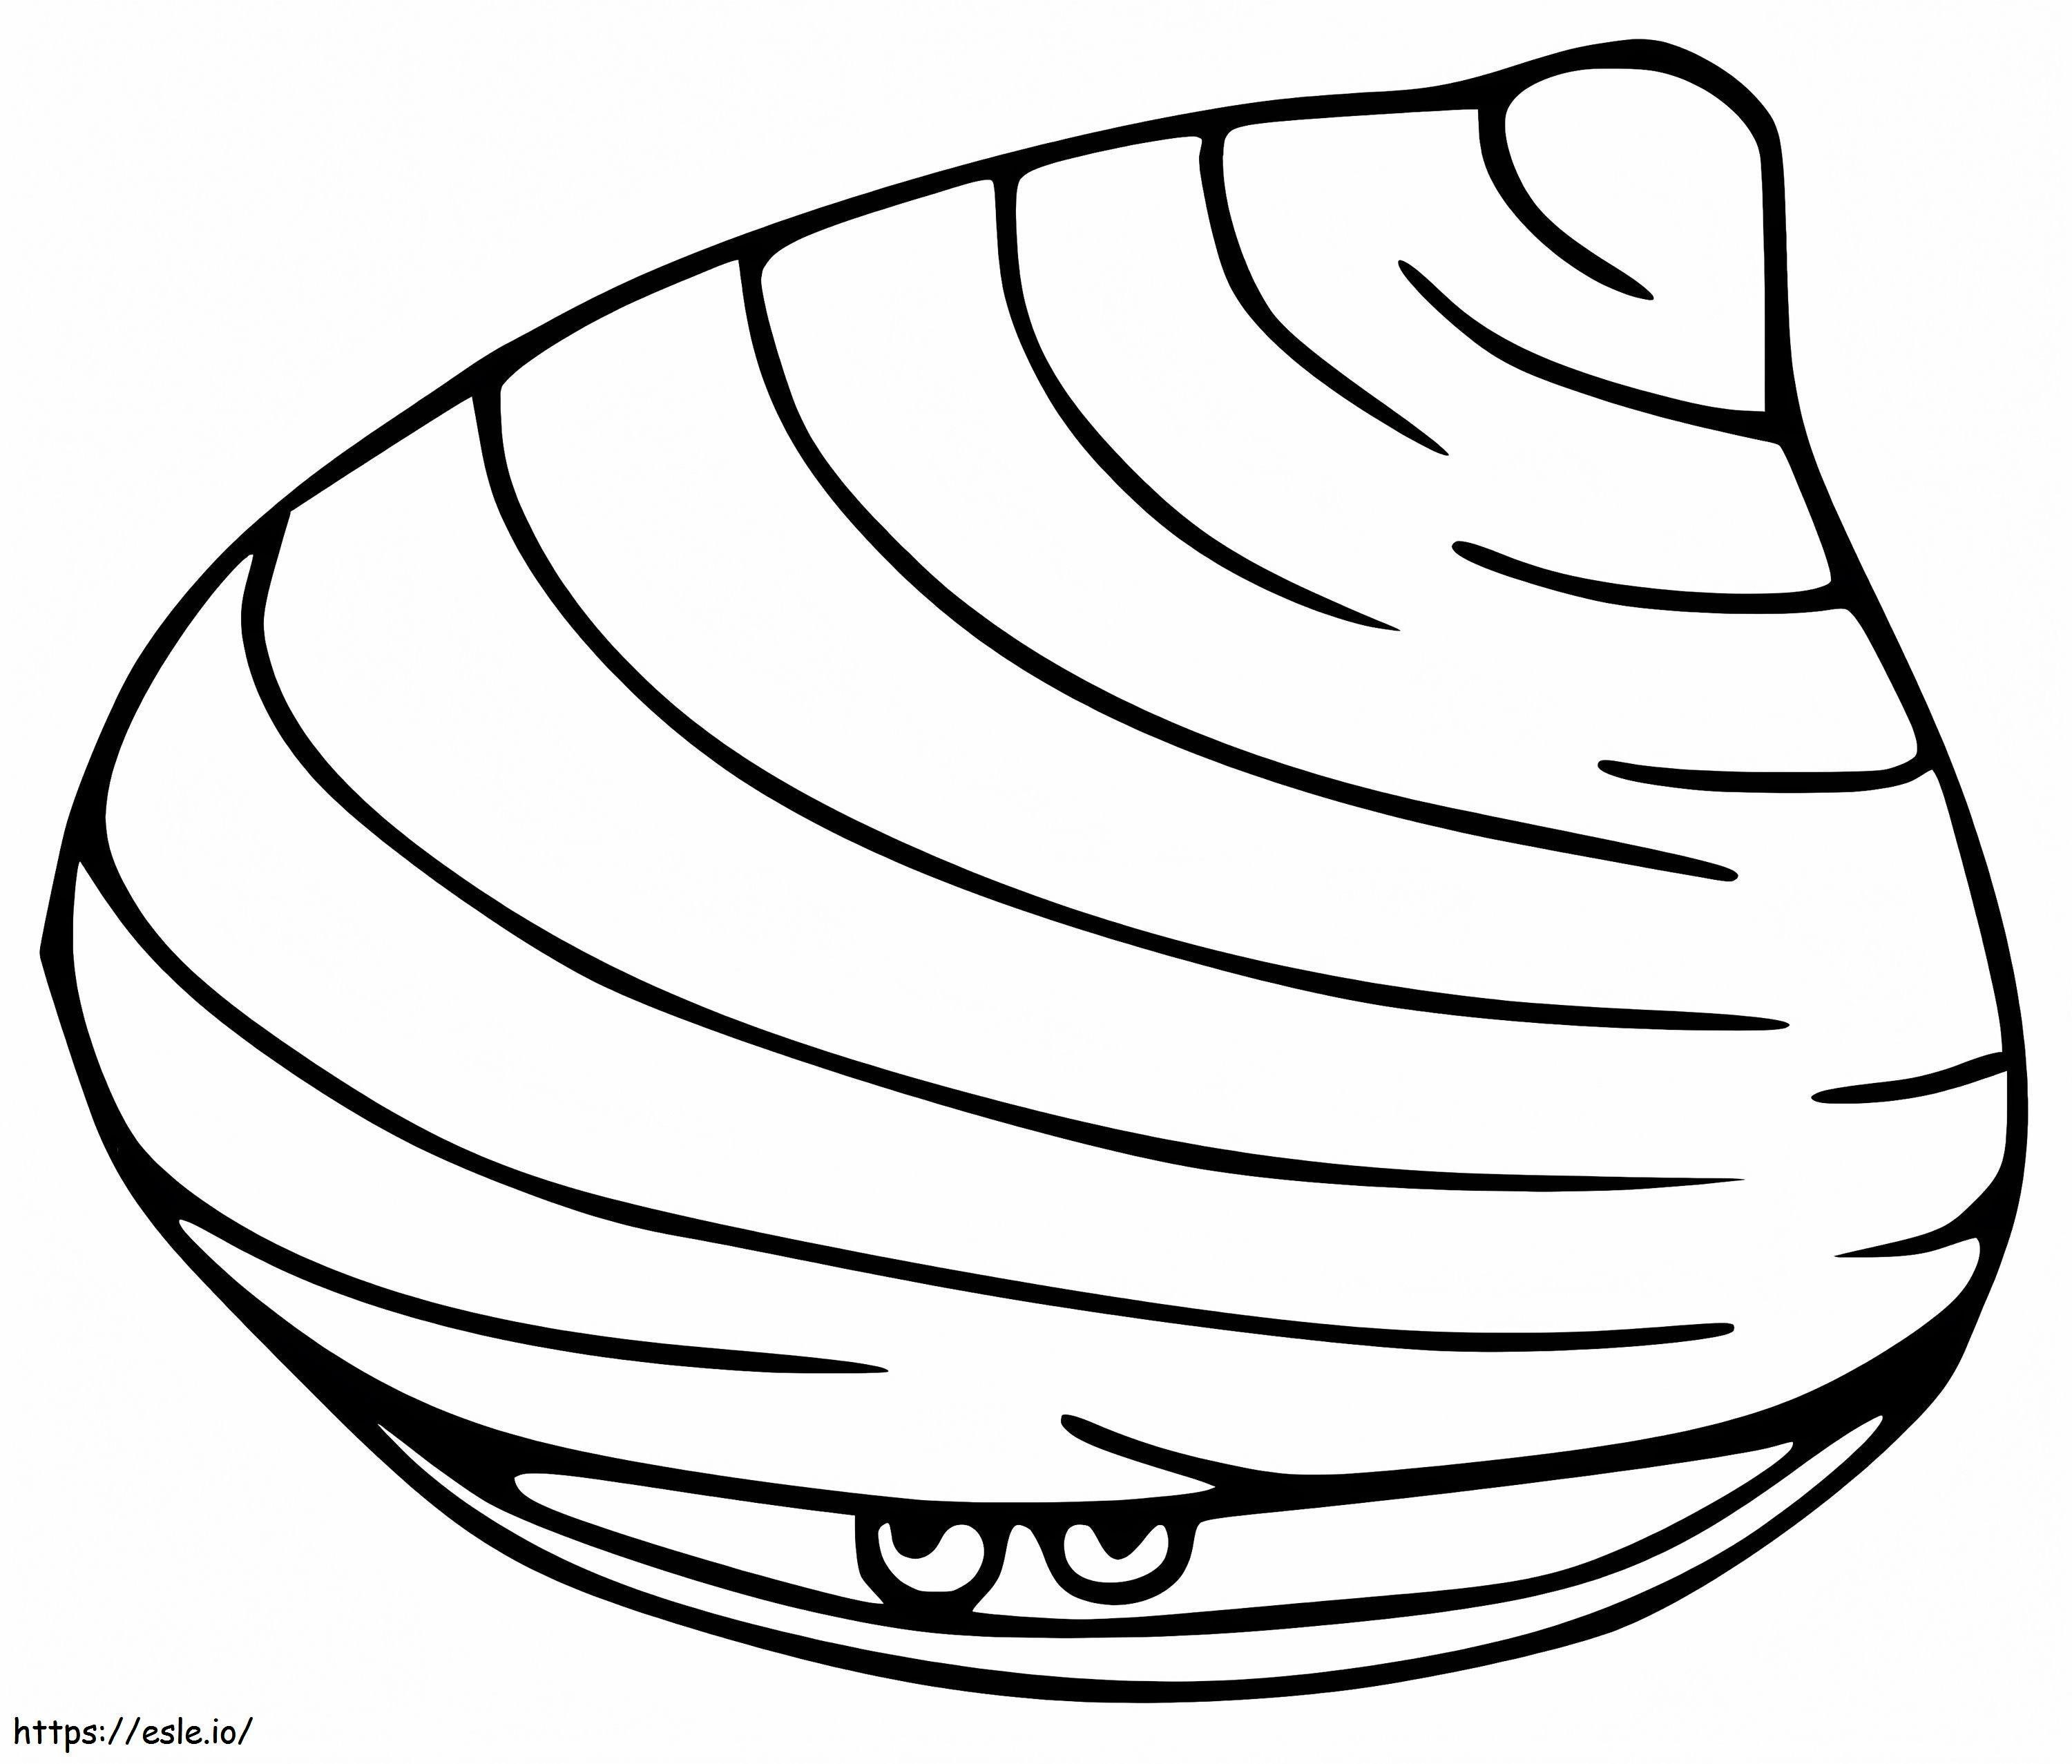 Printable Clam coloring page